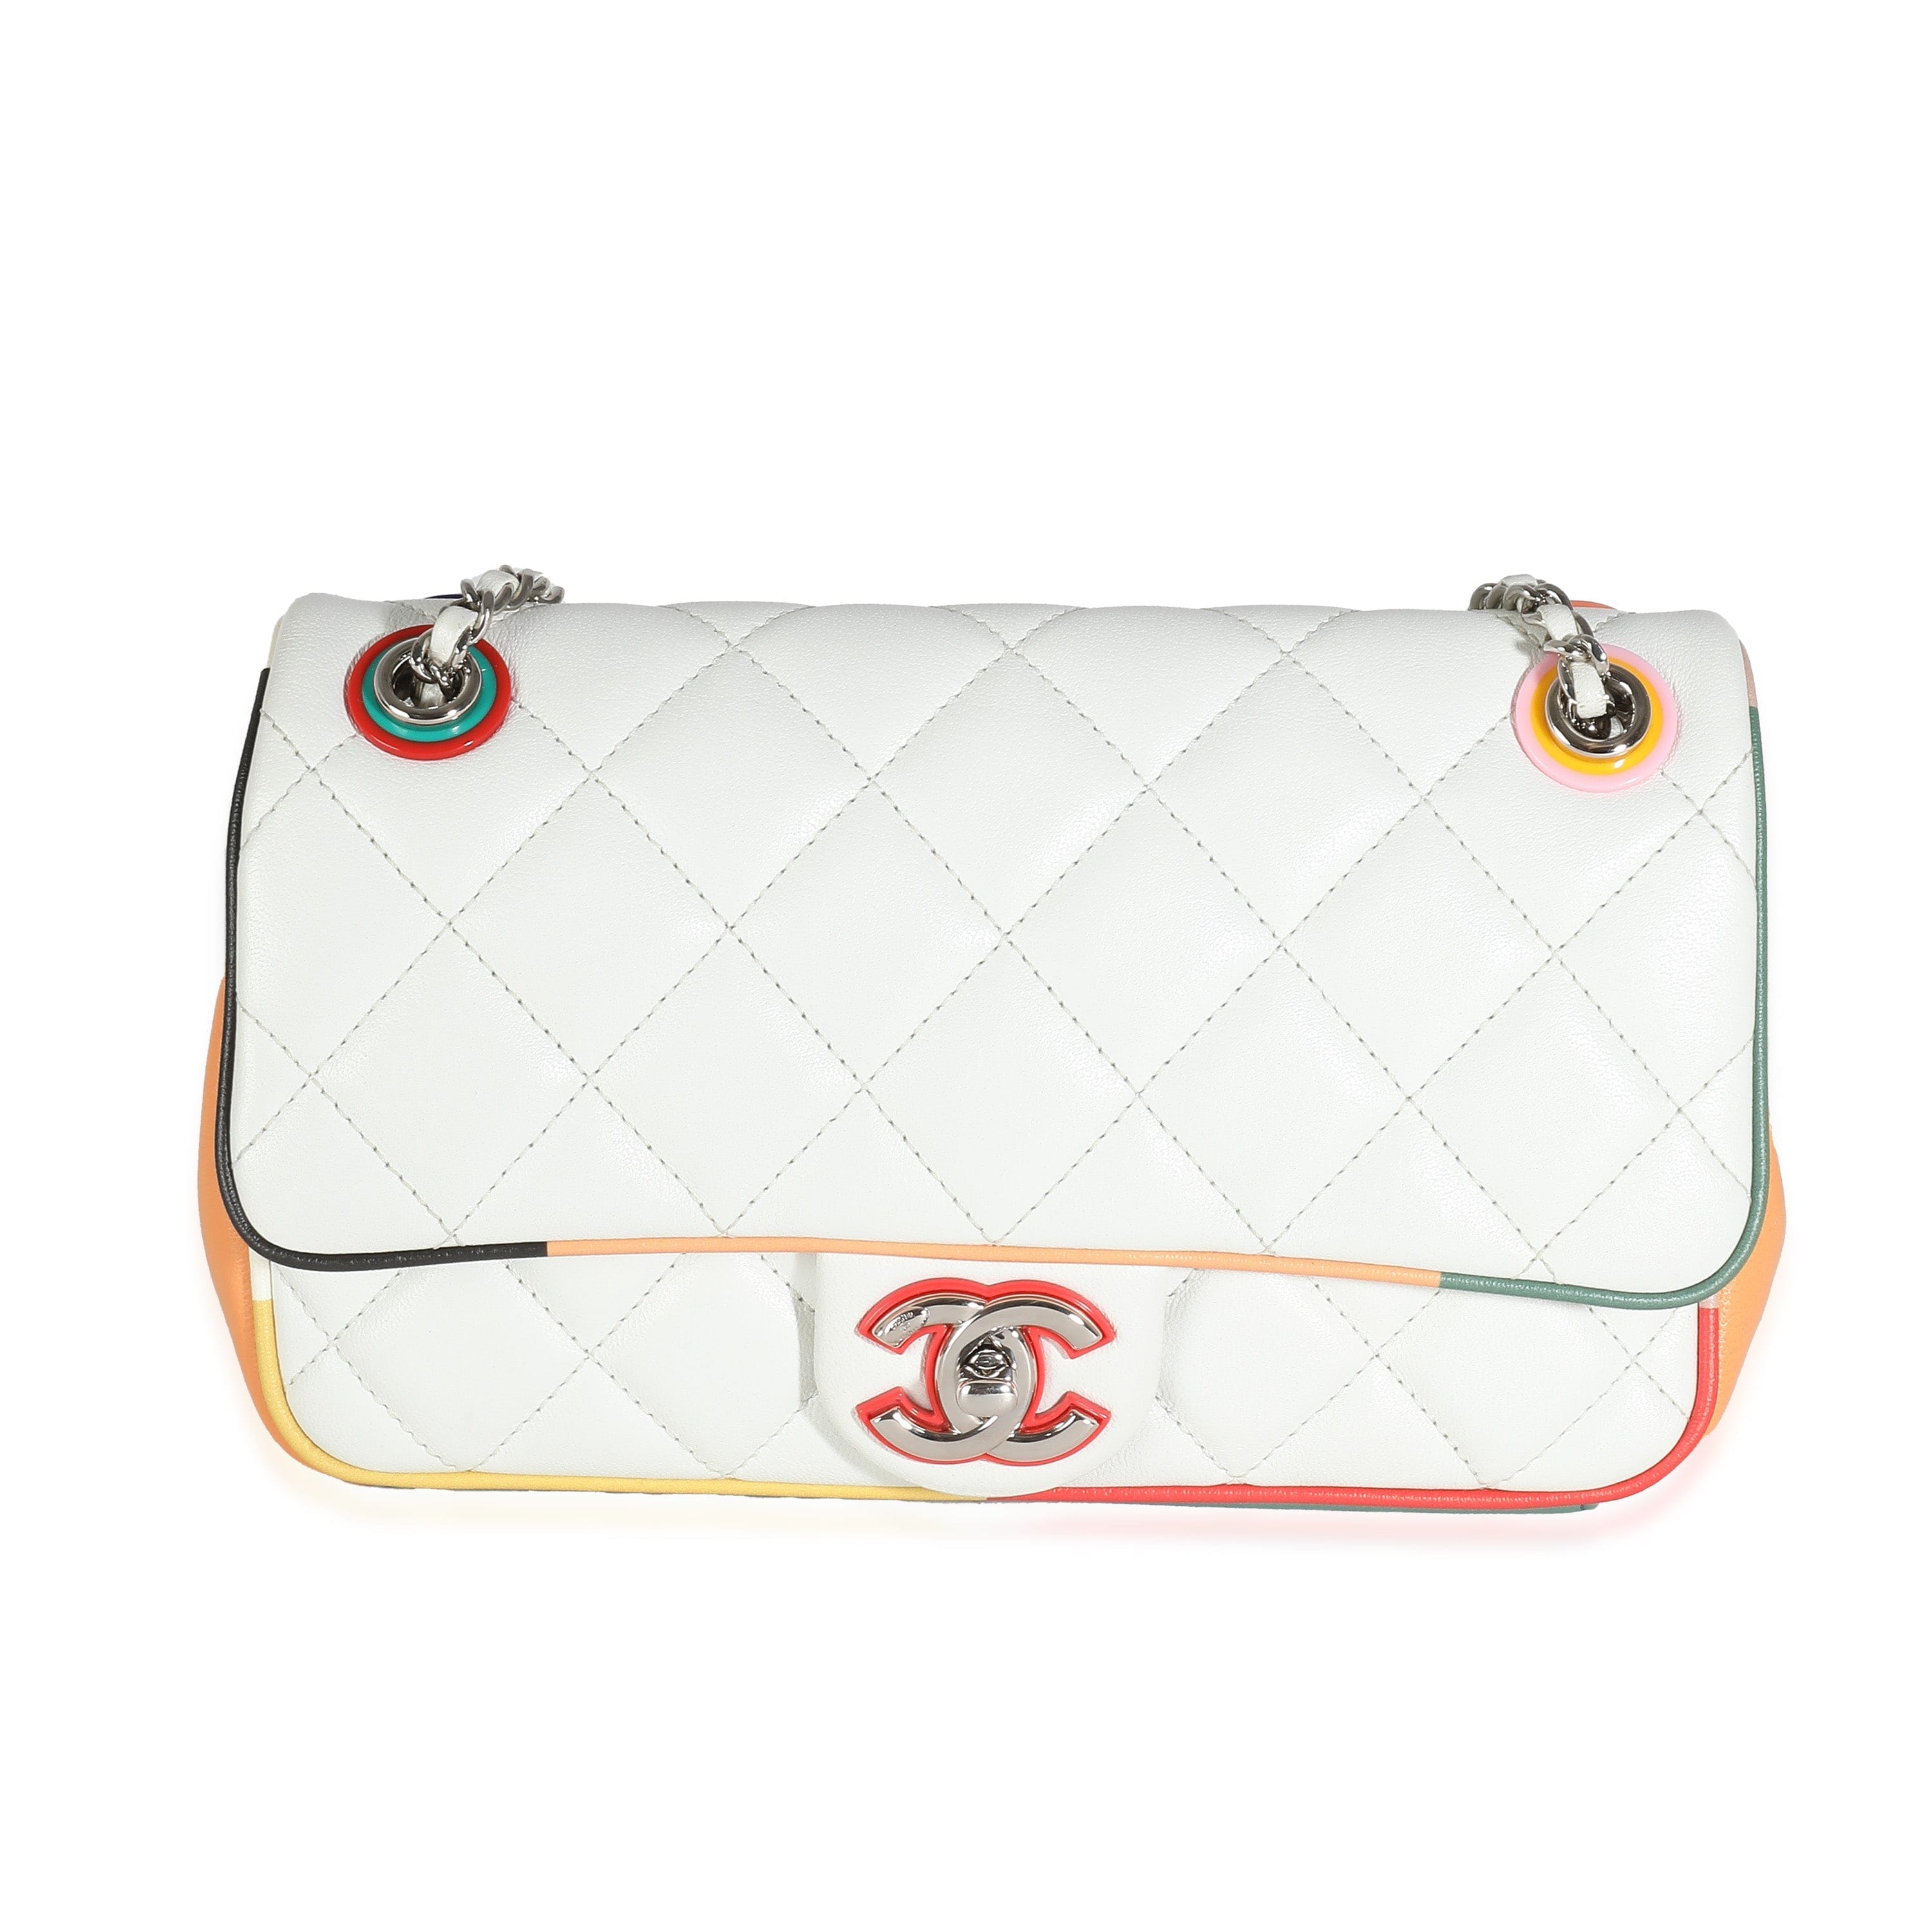 Chanel Chanel 17C White Multicolor Quilted Lambskin Small Cuba Color Flap Bag